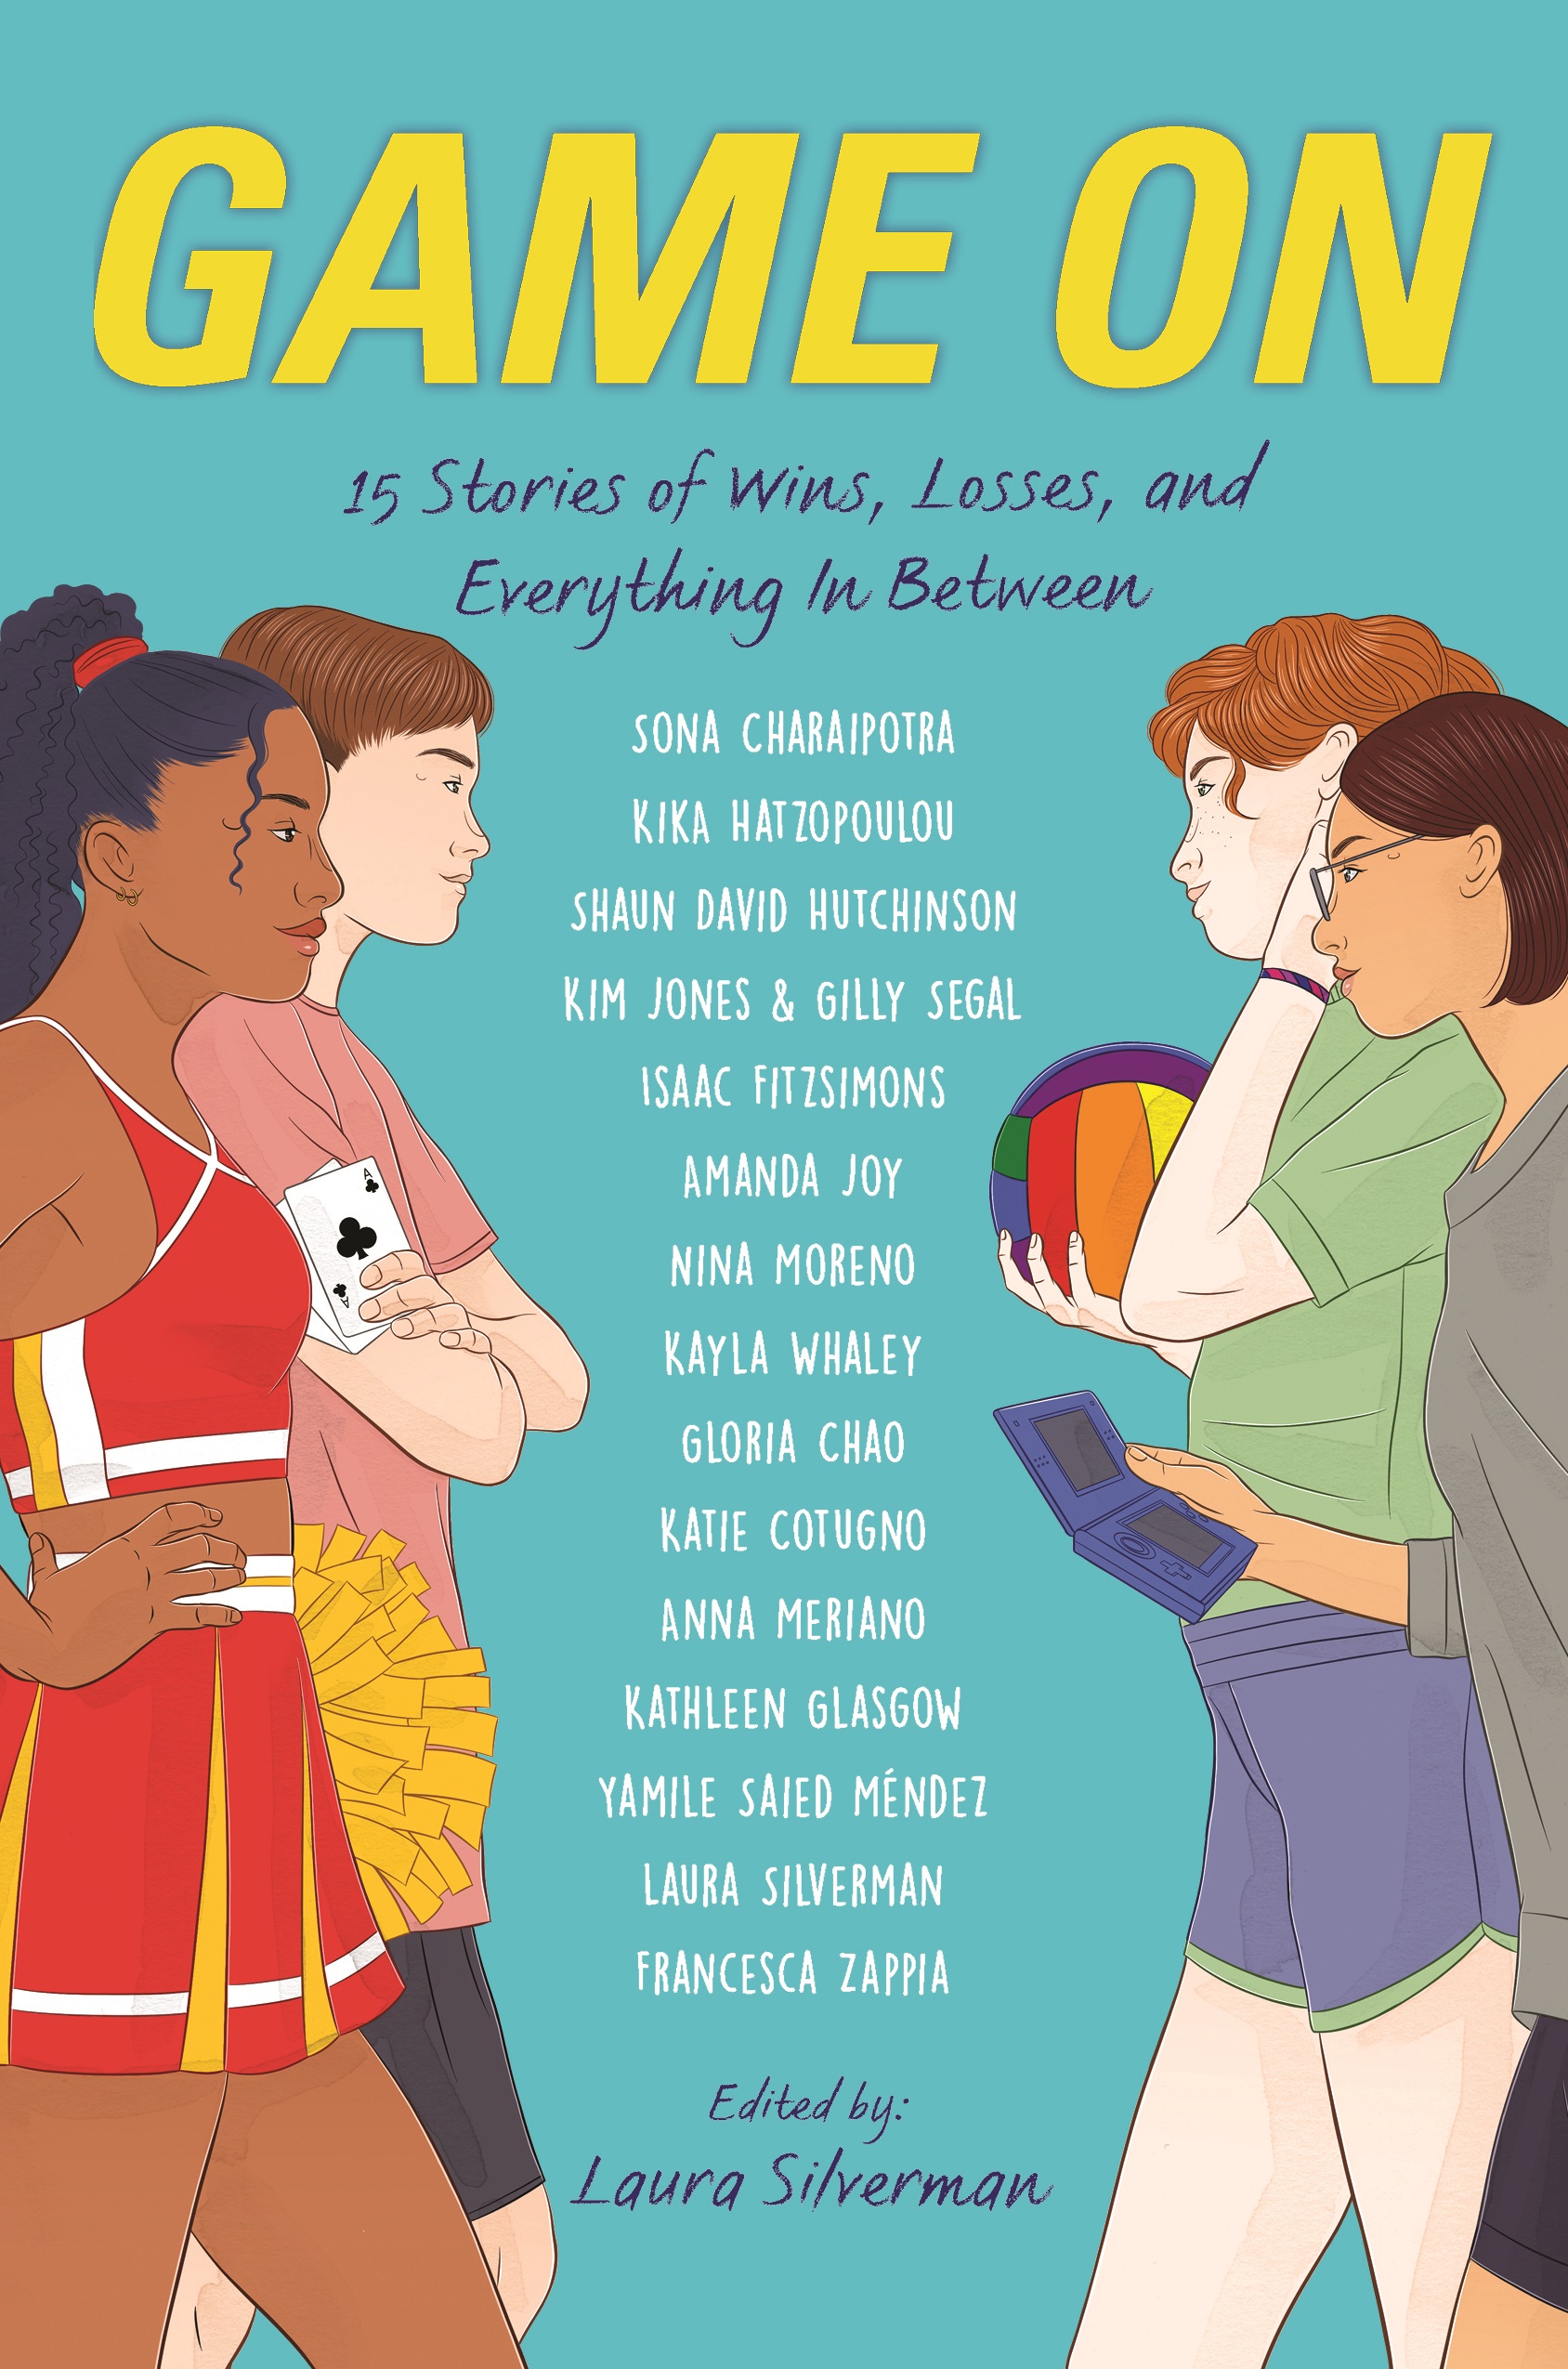 Cover of the YA anthology Game On featuring four characters and list of contributing authors.